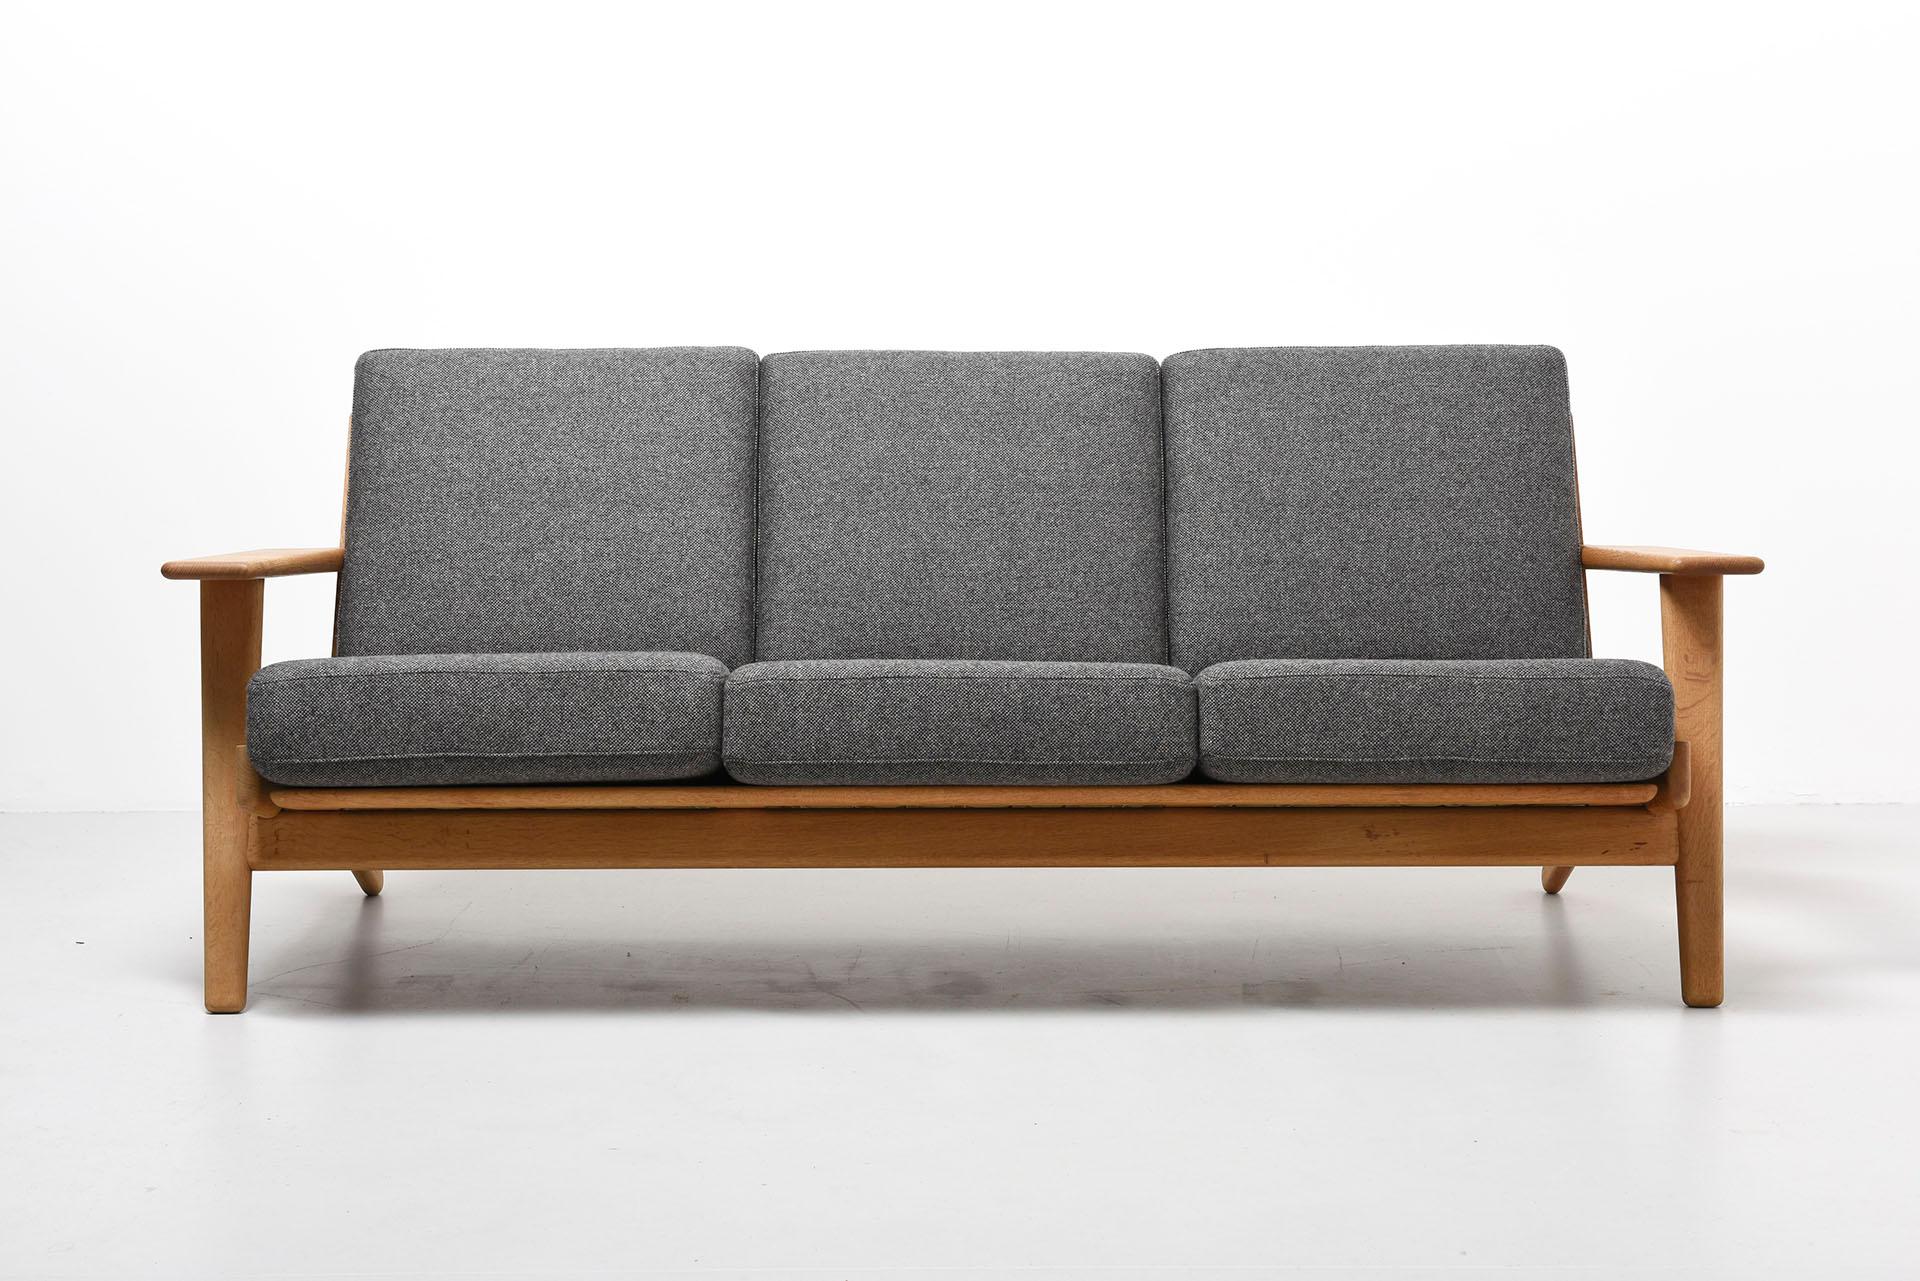 A 3-seat sofa designed by Hans J. Wegner in 1953. Model GE-290, produced by GETAMA in Denmark.
Solid oak frame with new cushions upholstered in soft wool felt.